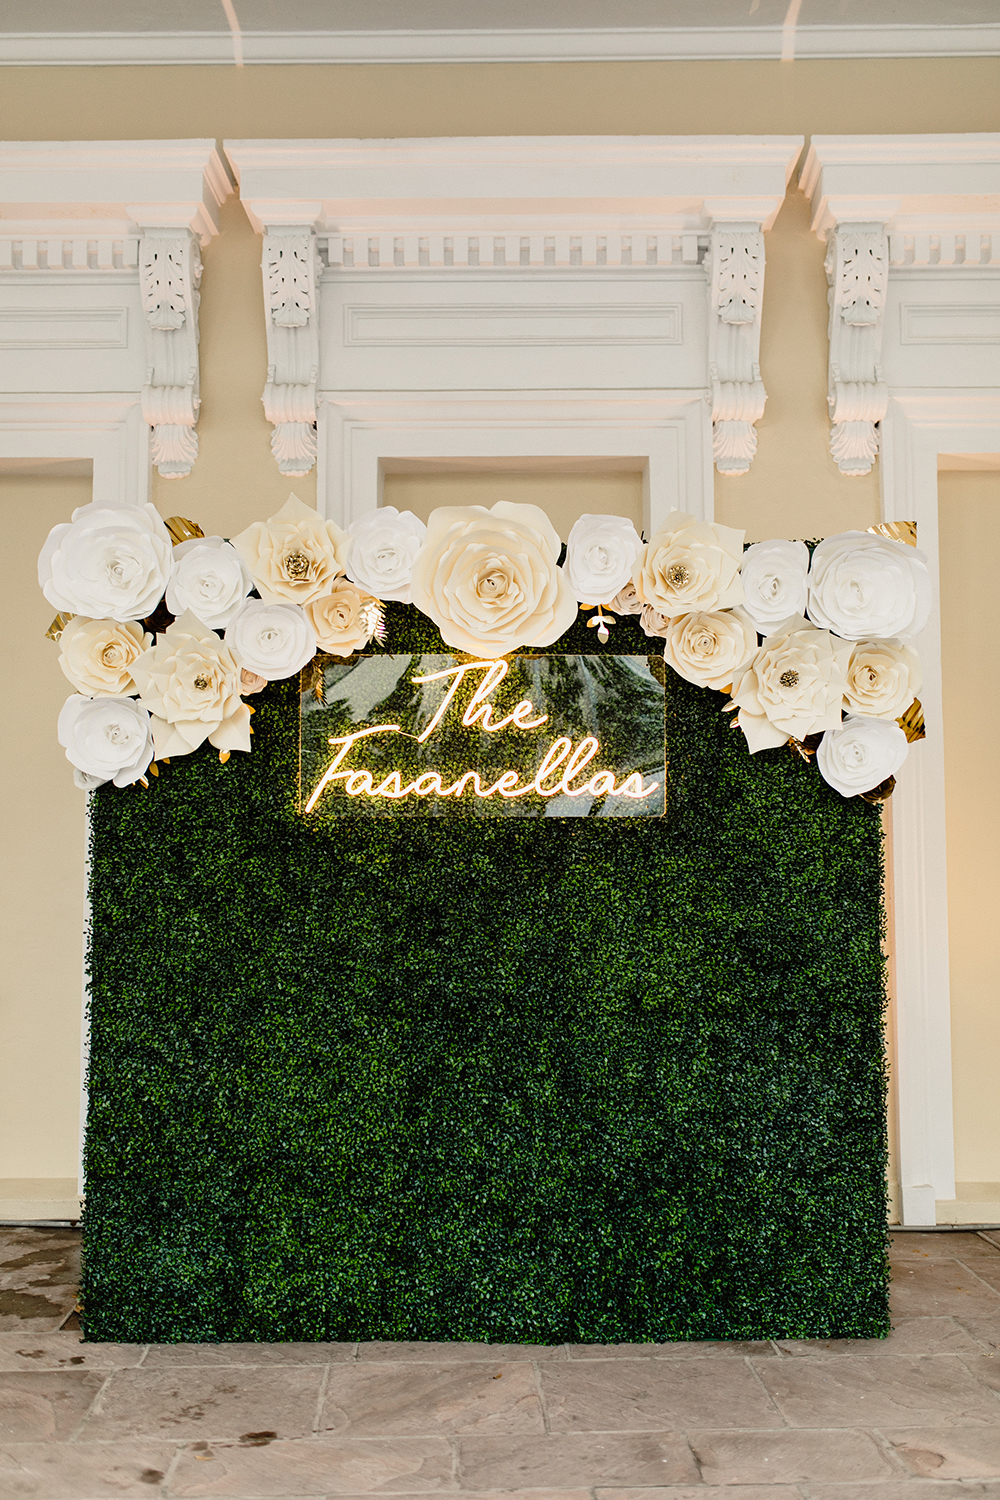 Nola Grace Decor's hedge wall photo opp with paper flowers and neon sign. Photo by Kristen Soileau.